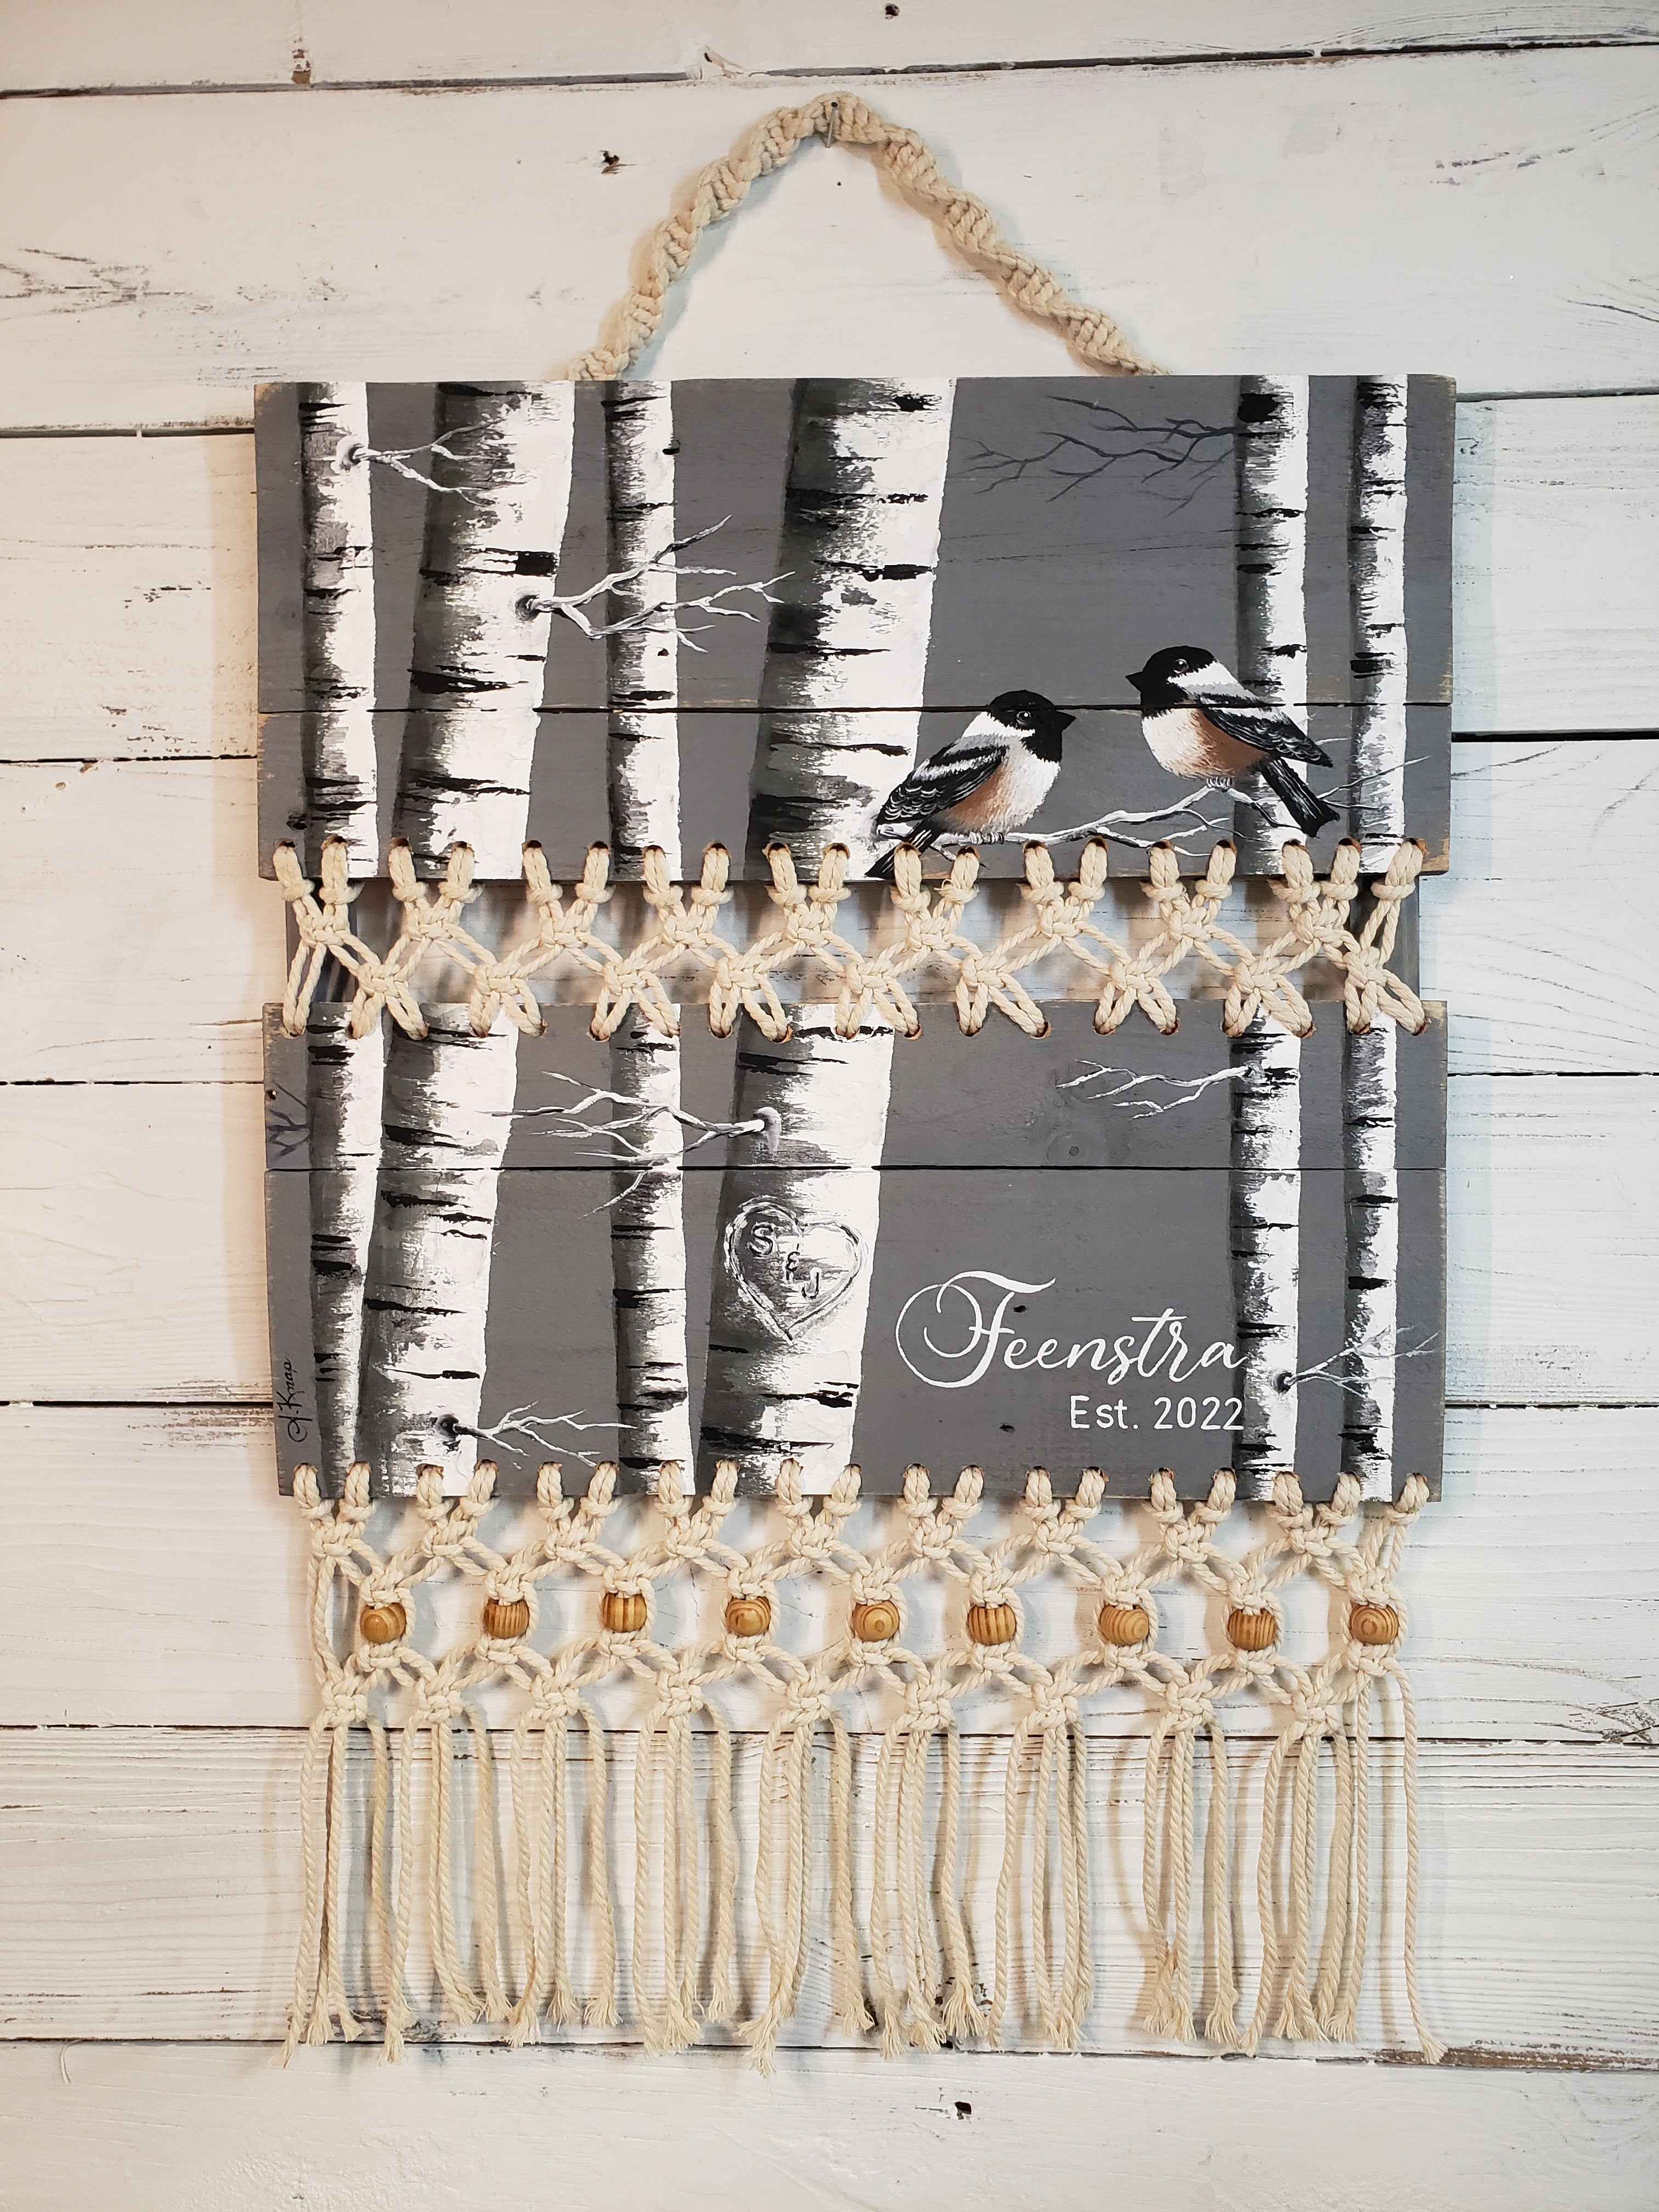 Wedding gift White Birch sweetheart sign, Gray BOHO macrame wall hanging, carved heart in tree, hand painted love bird chickadees